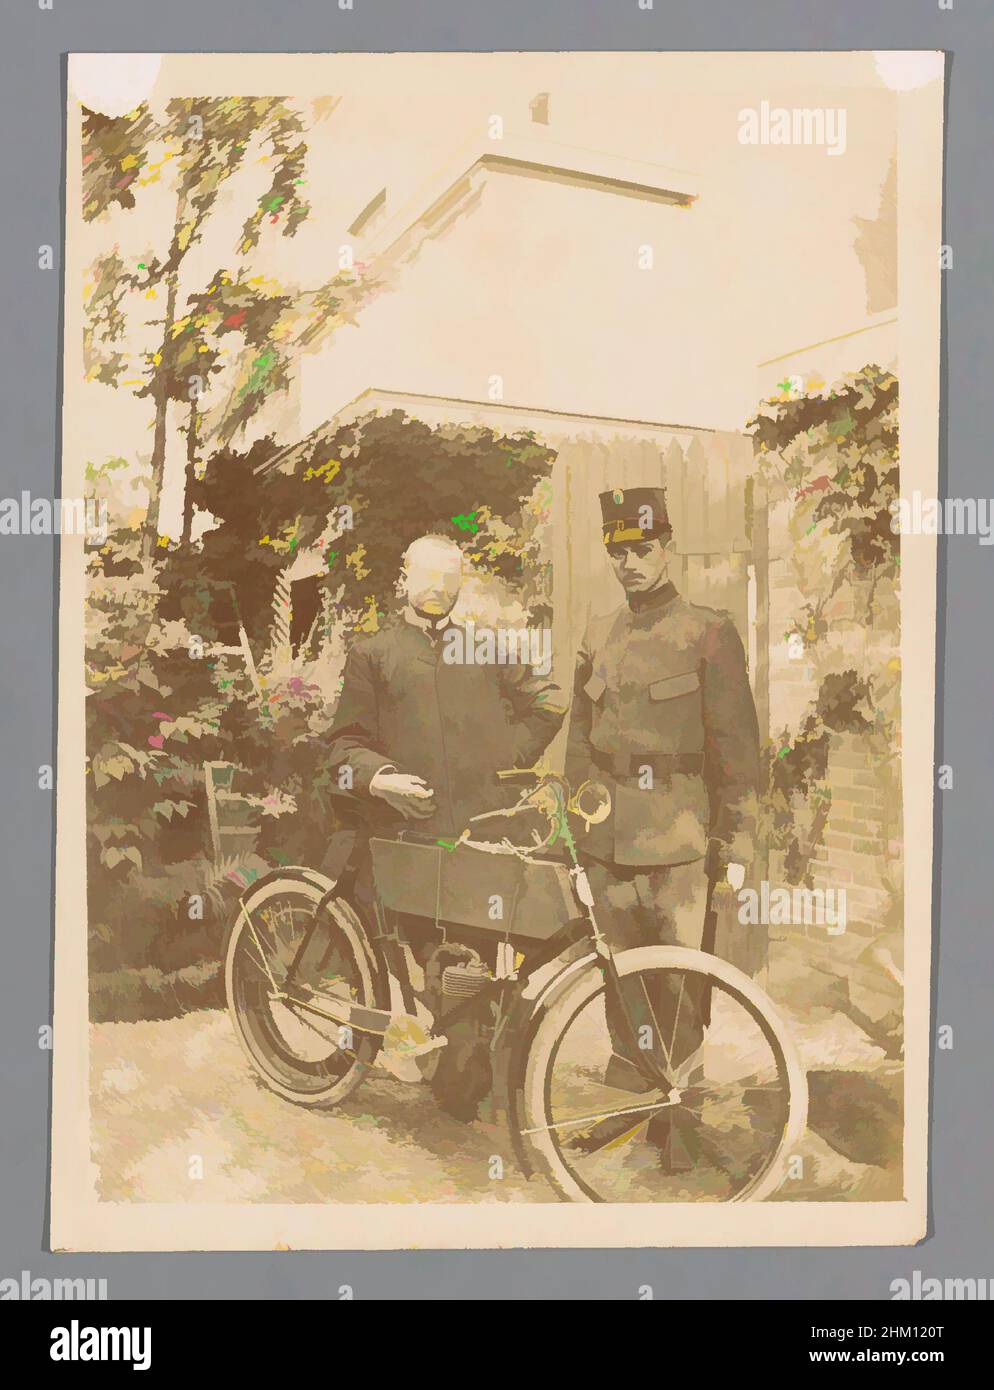 Art inspired by Unknown man and a policeman next to a motorcycle, Zeeland, c. 1903, photographic support, Classic works modernized by Artotop with a splash of modernity. Shapes, color and value, eye-catching visual impact on art. Emotions through freedom of artworks in a contemporary way. A timeless message pursuing a wildly creative new direction. Artists turning to the digital medium and creating the Artotop NFT Stock Photo